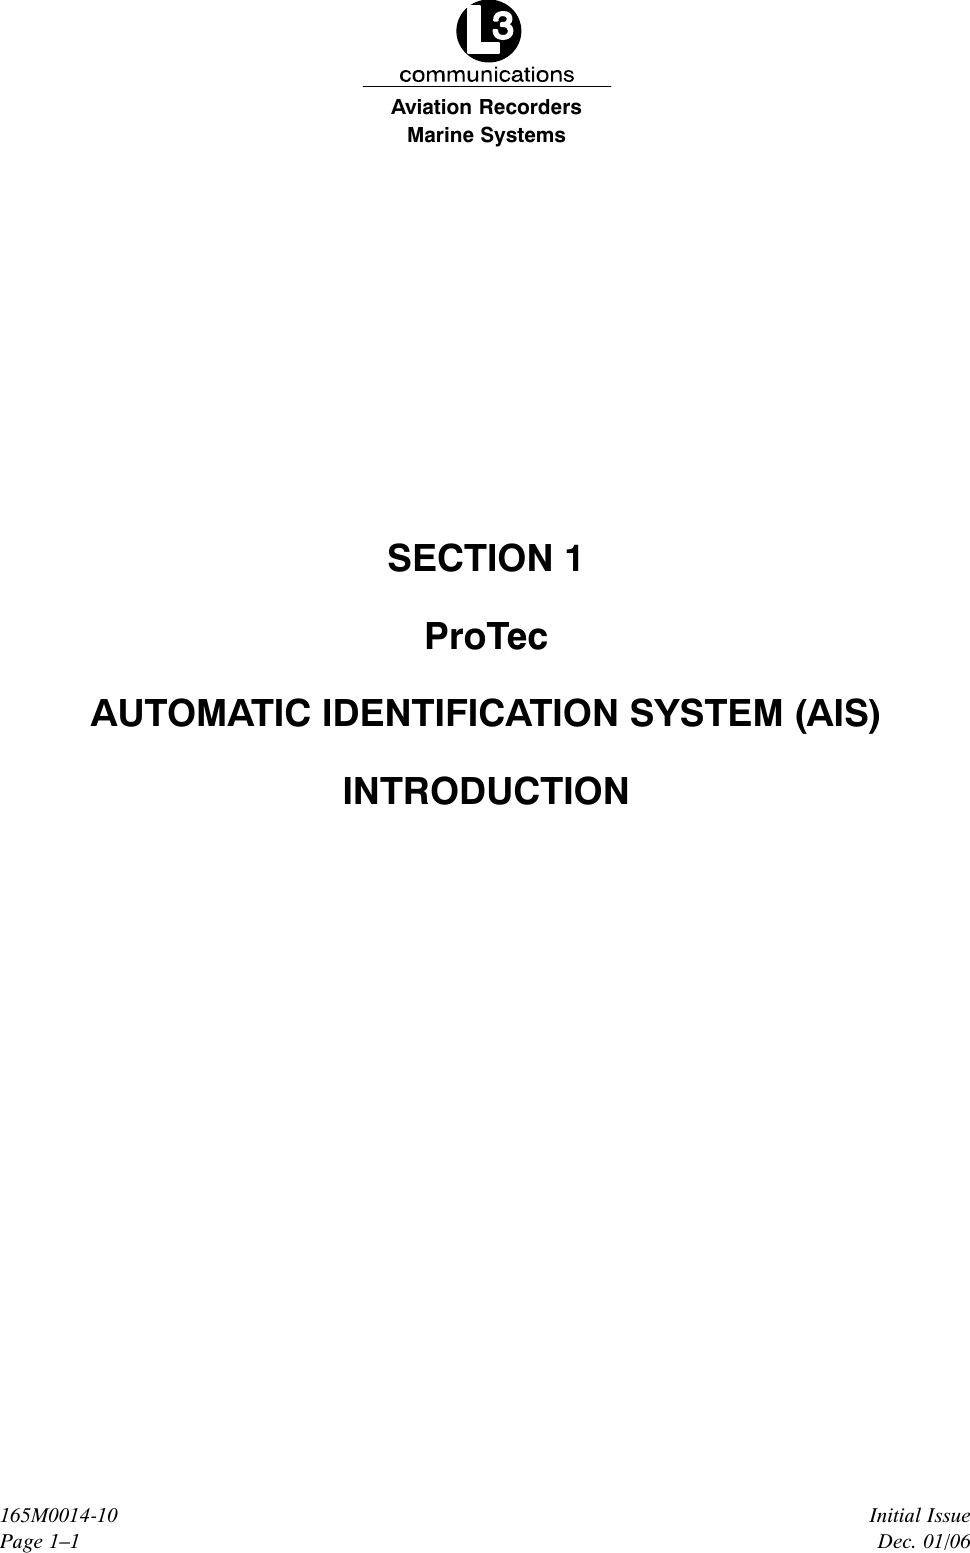 Marine SystemsAviation RecordersInitial IssueDec. 01/06165M0014-10Page 1–1SECTION 1ProTecAUTOMATIC IDENTIFICATION SYSTEM (AIS)INTRODUCTION